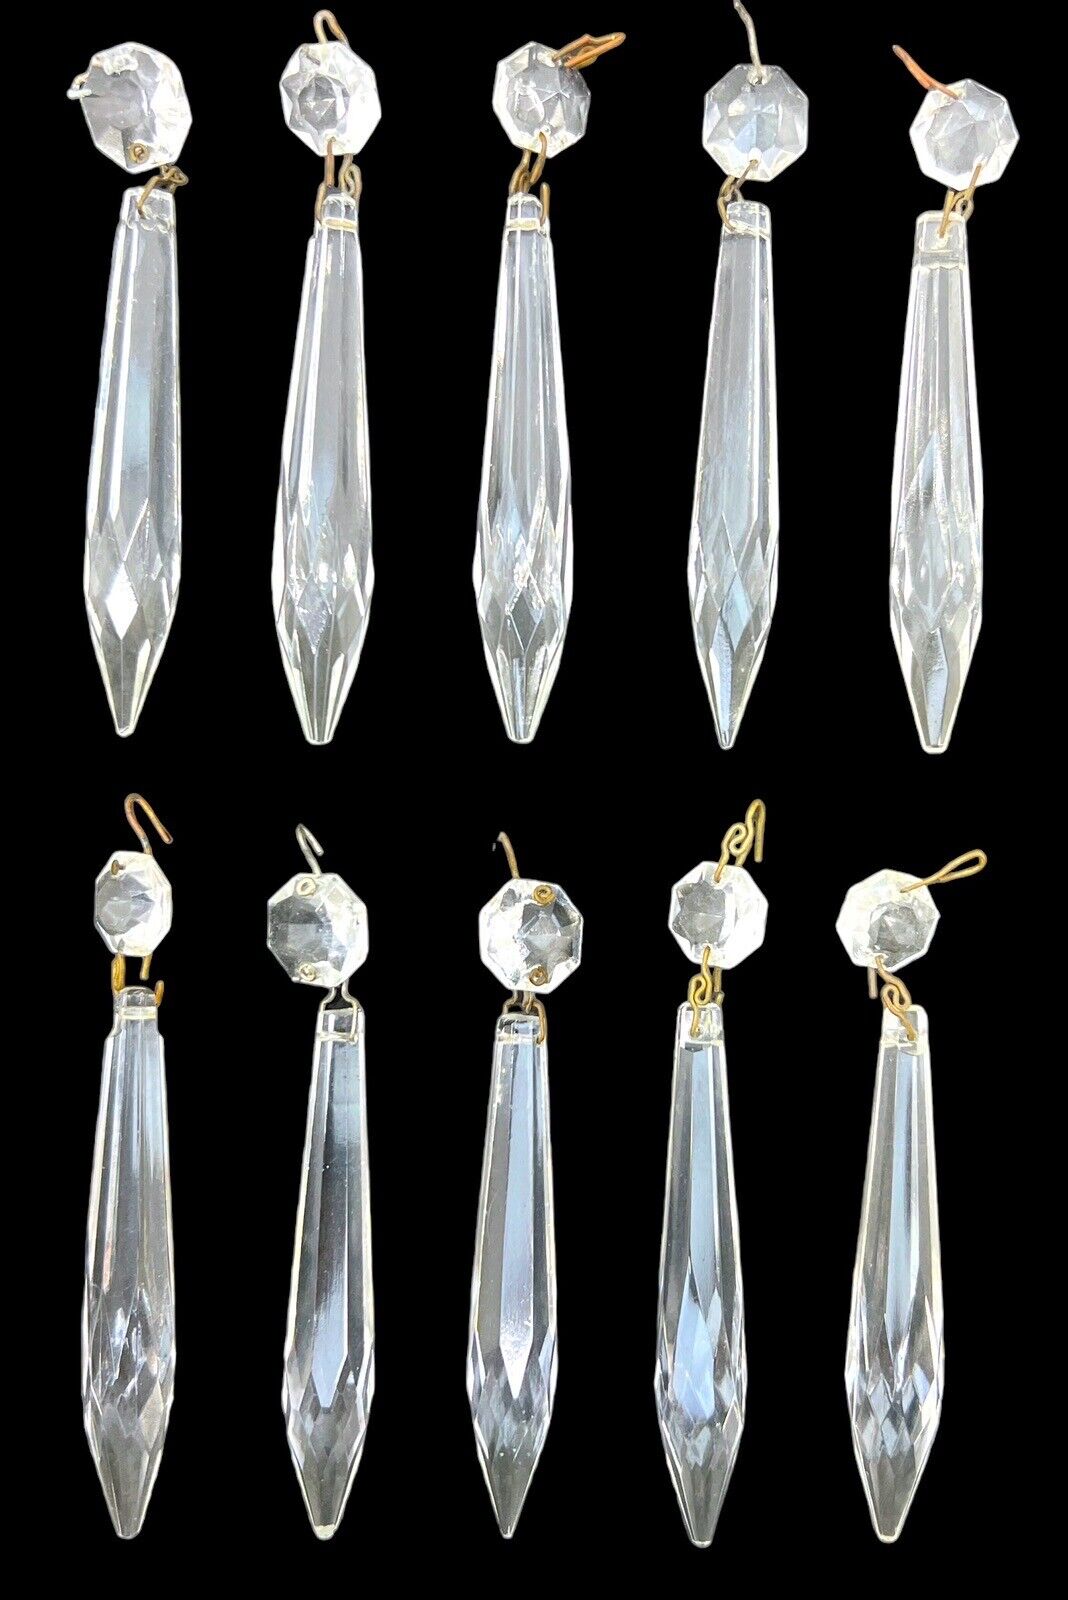 Vintage Large 3” Icicle Chandelier Glass Prisms With Beads Lot of 10